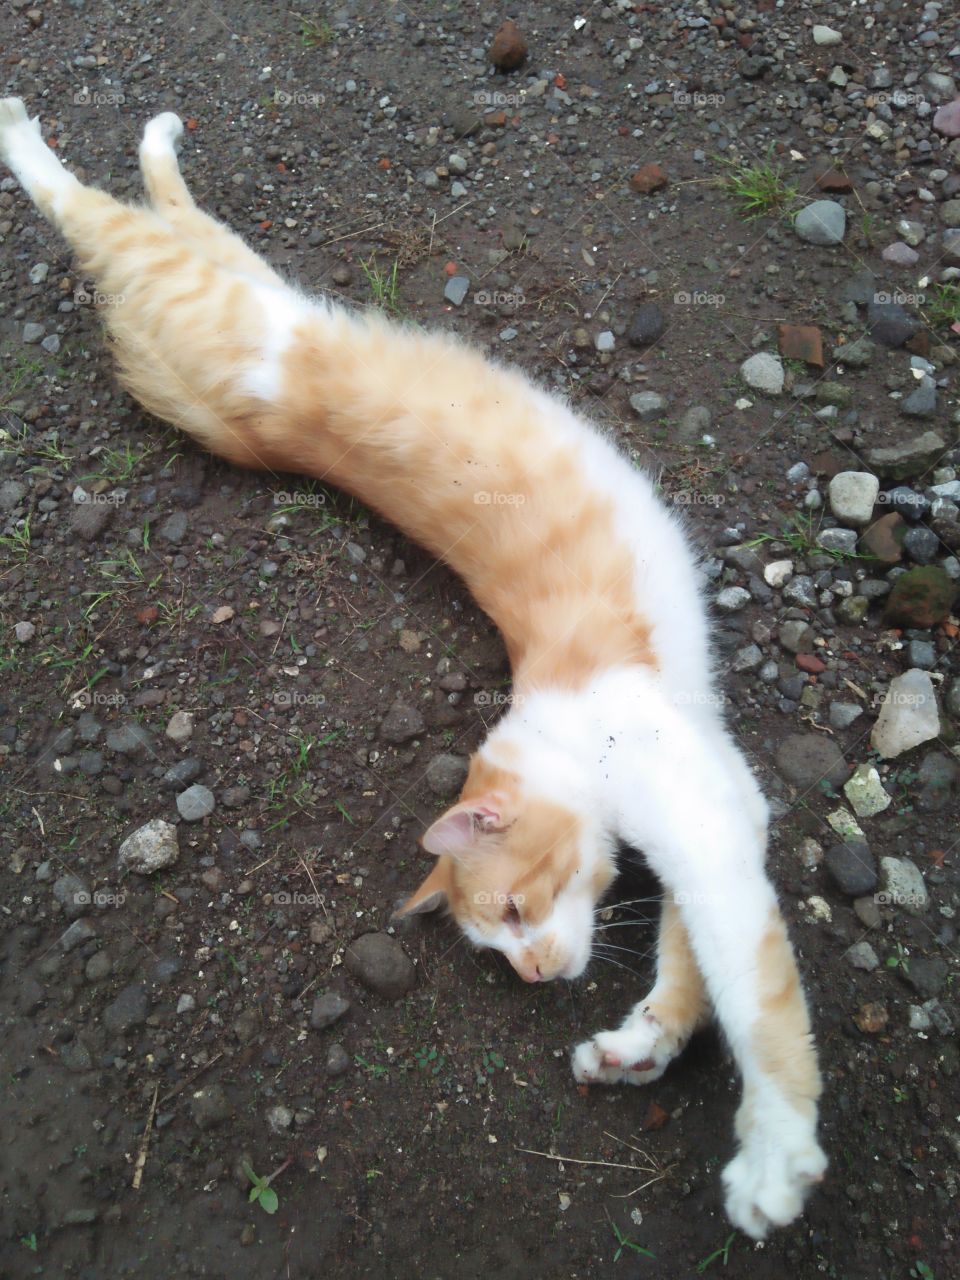 Stretching cat before take an exercise. Good job kitty! Are you still sleepy, huh?